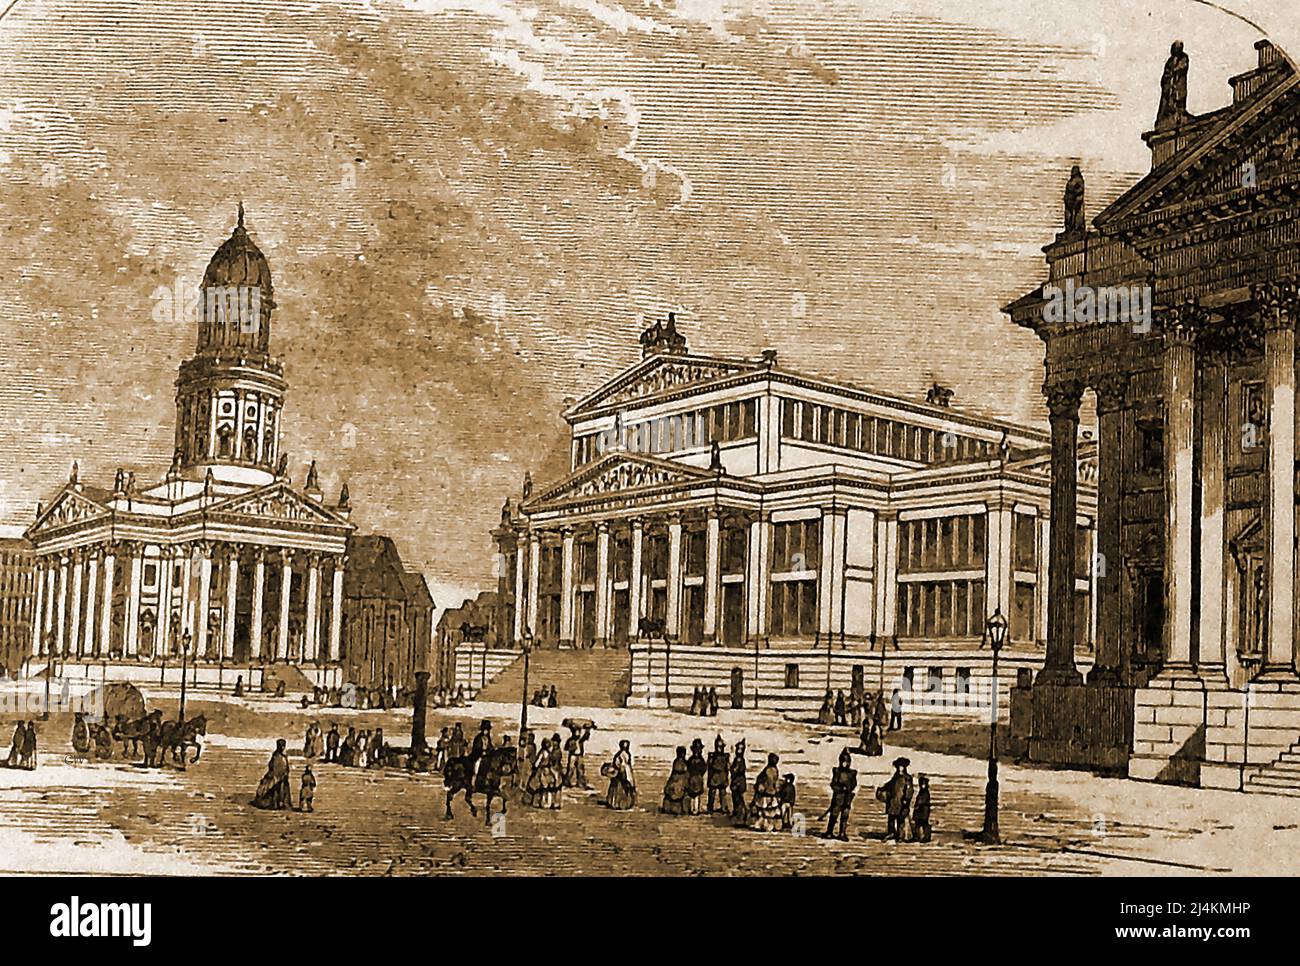 A 19th century British engraving  of gensdarmenmarkt, Berlin, Germany with the Royal Theatre (left) and New Church. The Gendarmenmarkt  square is the site of an architectural interest with notable buildings such as the Berlin concert hall and the French & German Churches and a  statue of poet Friedrich Schiller. It was built in the 1600's by by Johann Arnold Nering as the Linden-Markt and rebuilt by Georg Christian Unger in 1773.  Its name is derived from the cuirassier regiment Gens d'Armes, who had stables here  until 1773. The present buildings were restored after being damaged  in WWII Stock Photo